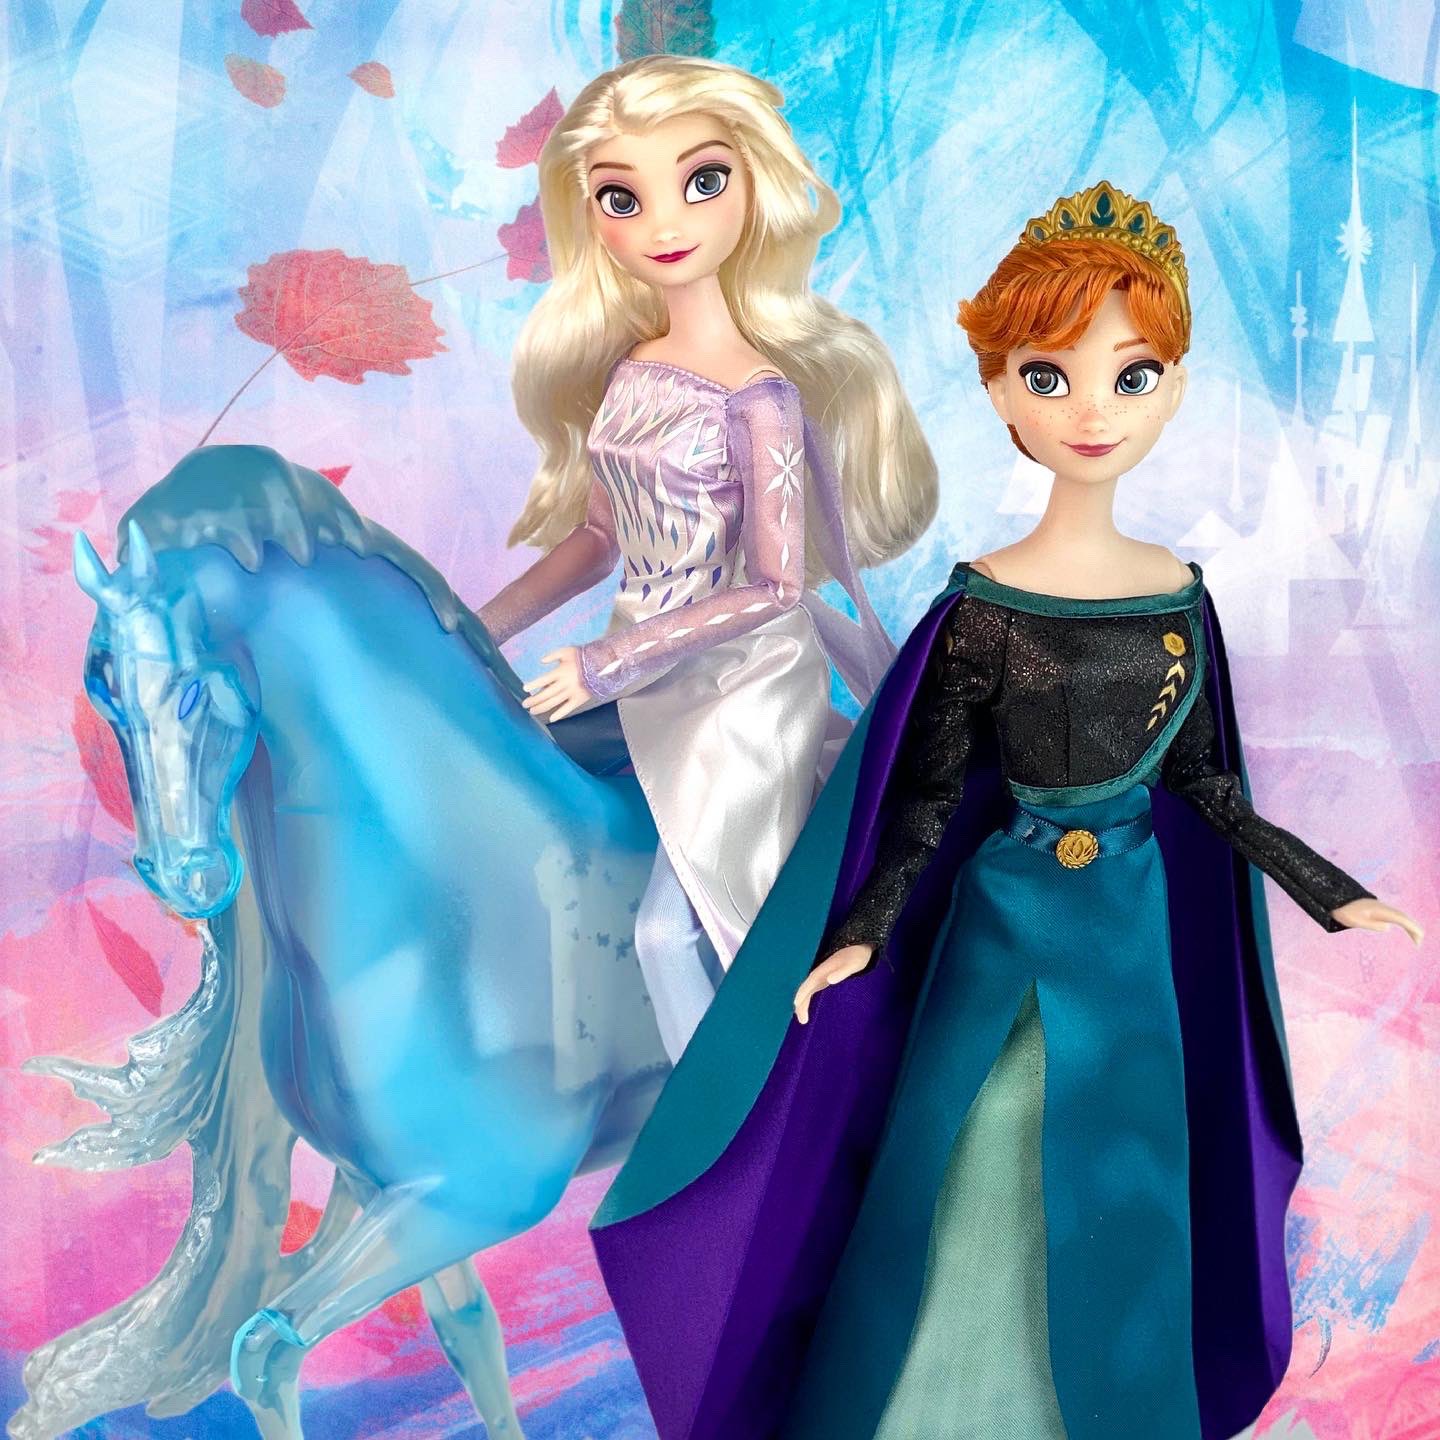 “New Anna &amp; Snow Queen Elsa doll set from @shopDisney ❄️ Review...